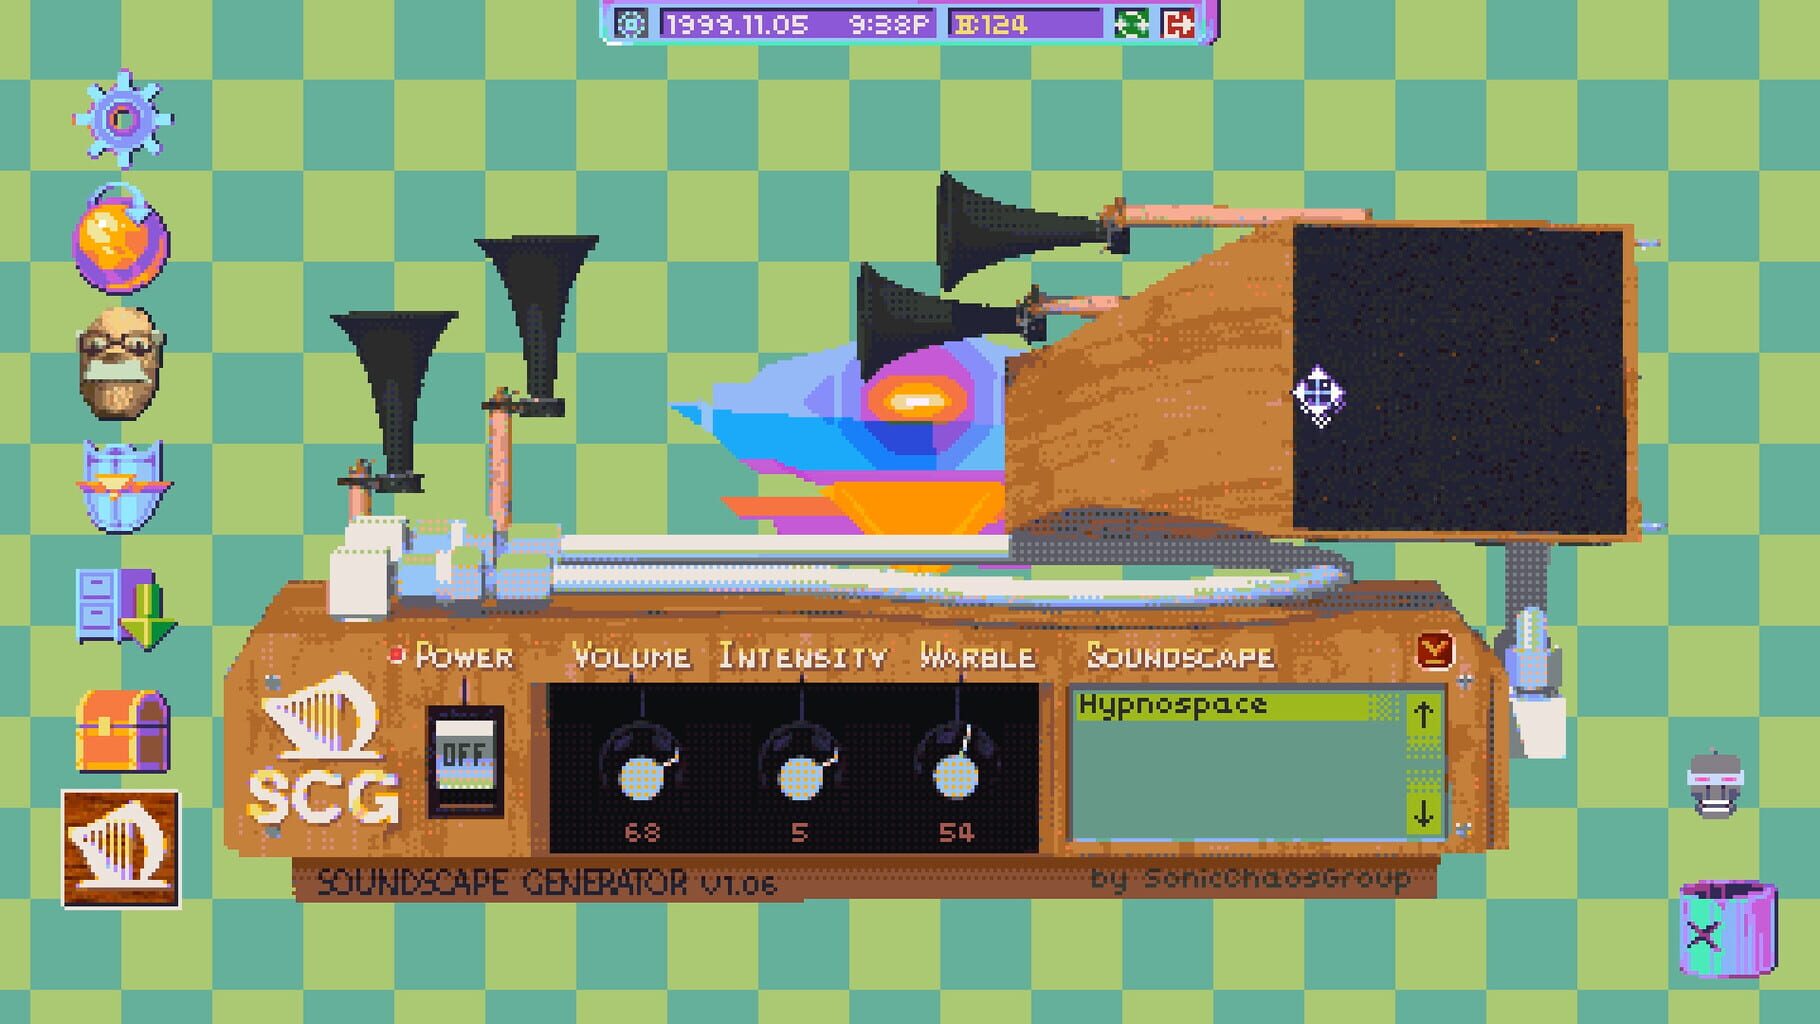 Screenshot for Hypnospace Outlaw